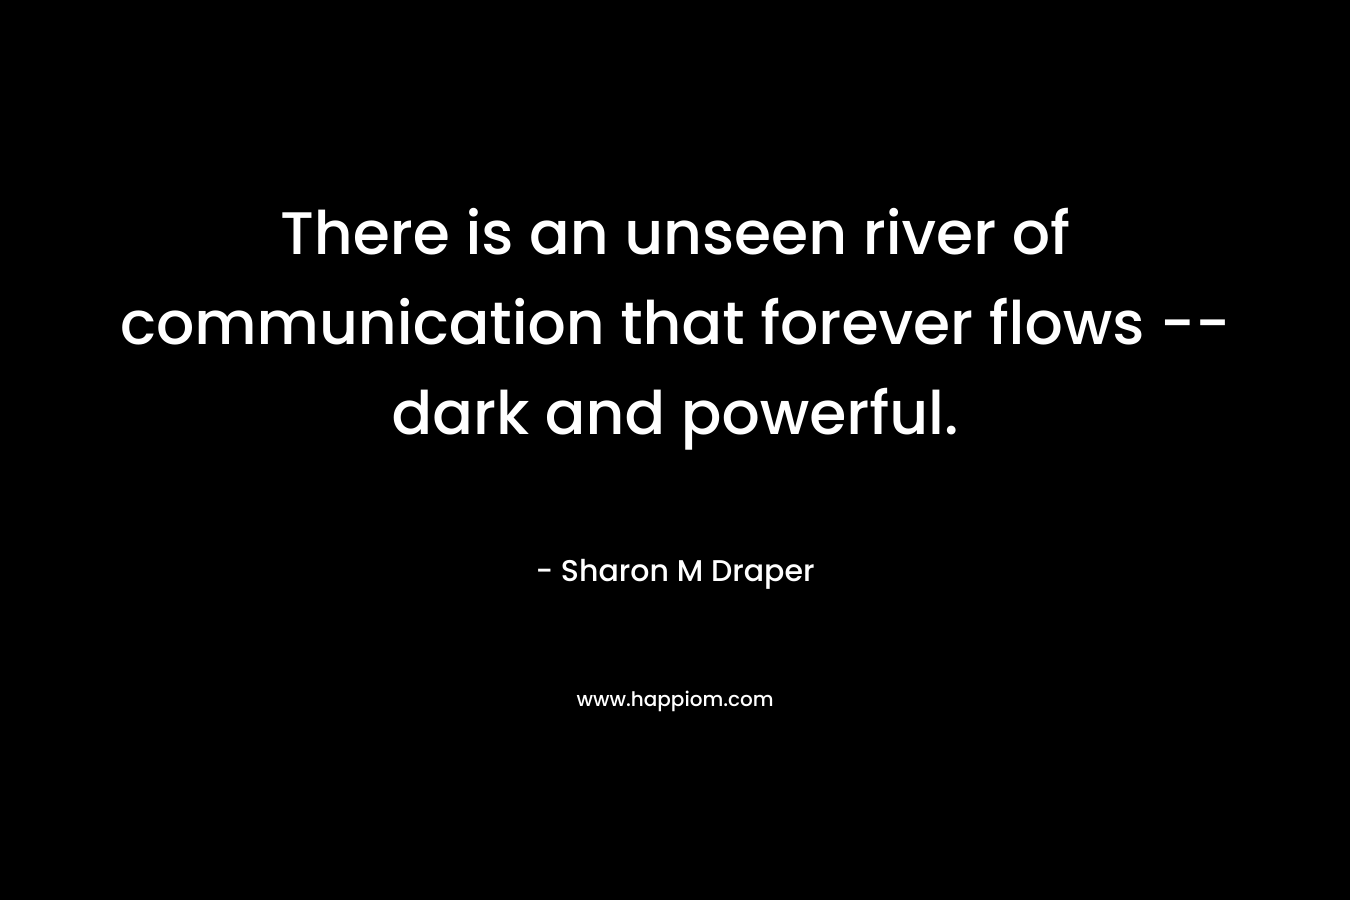 There is an unseen river of communication that forever flows — dark and powerful. – Sharon M Draper